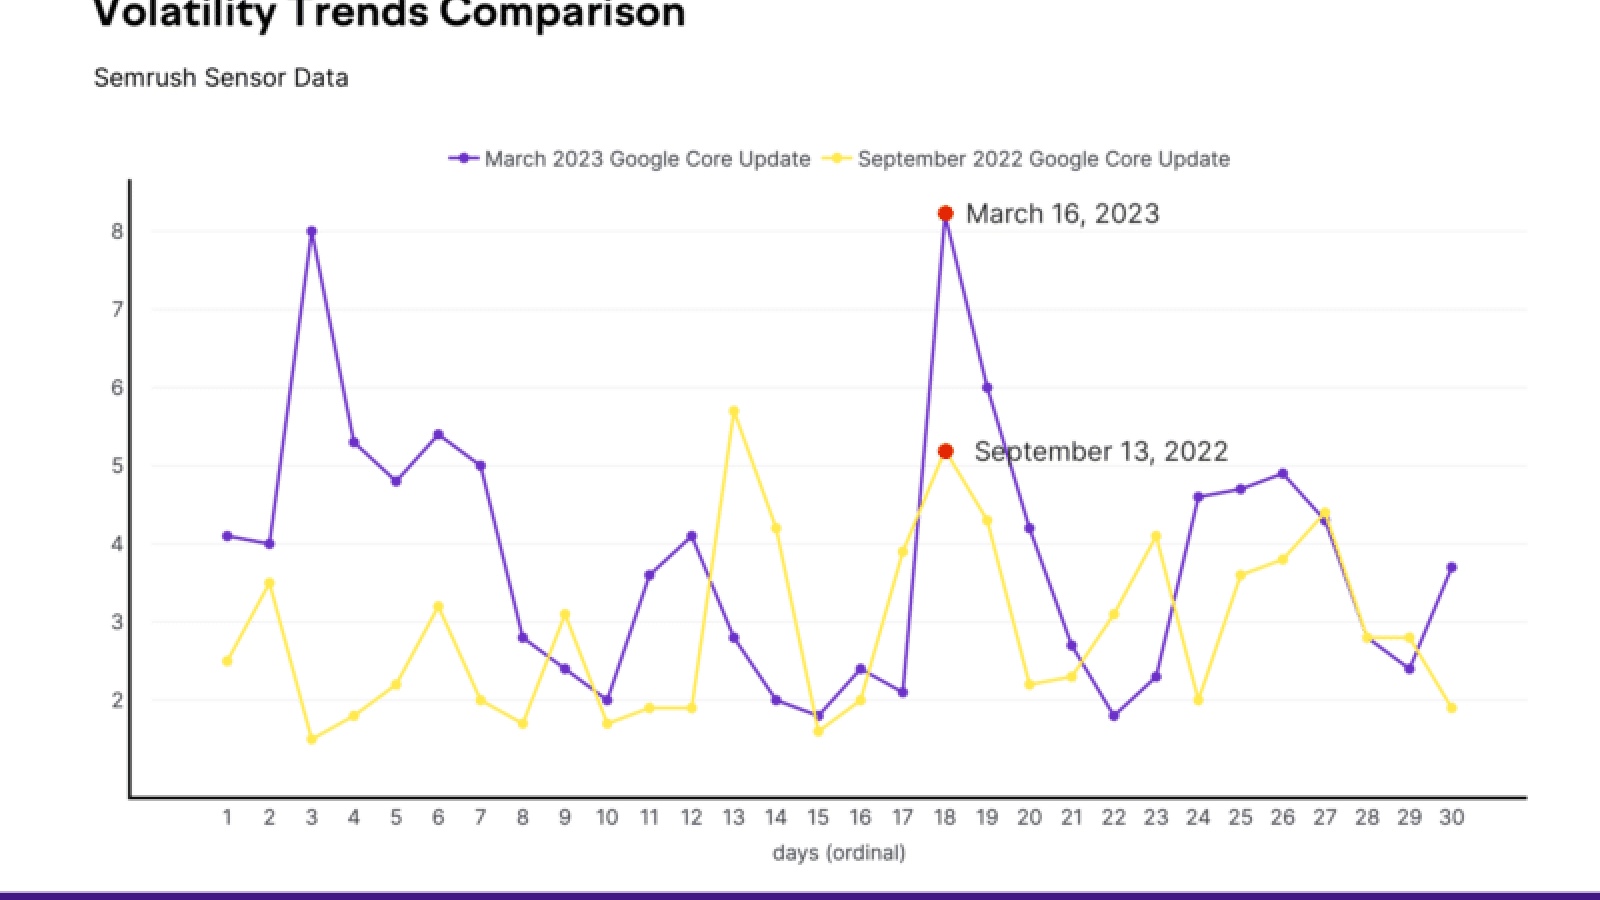 How the March 2023 Google core update compared to previous core updates